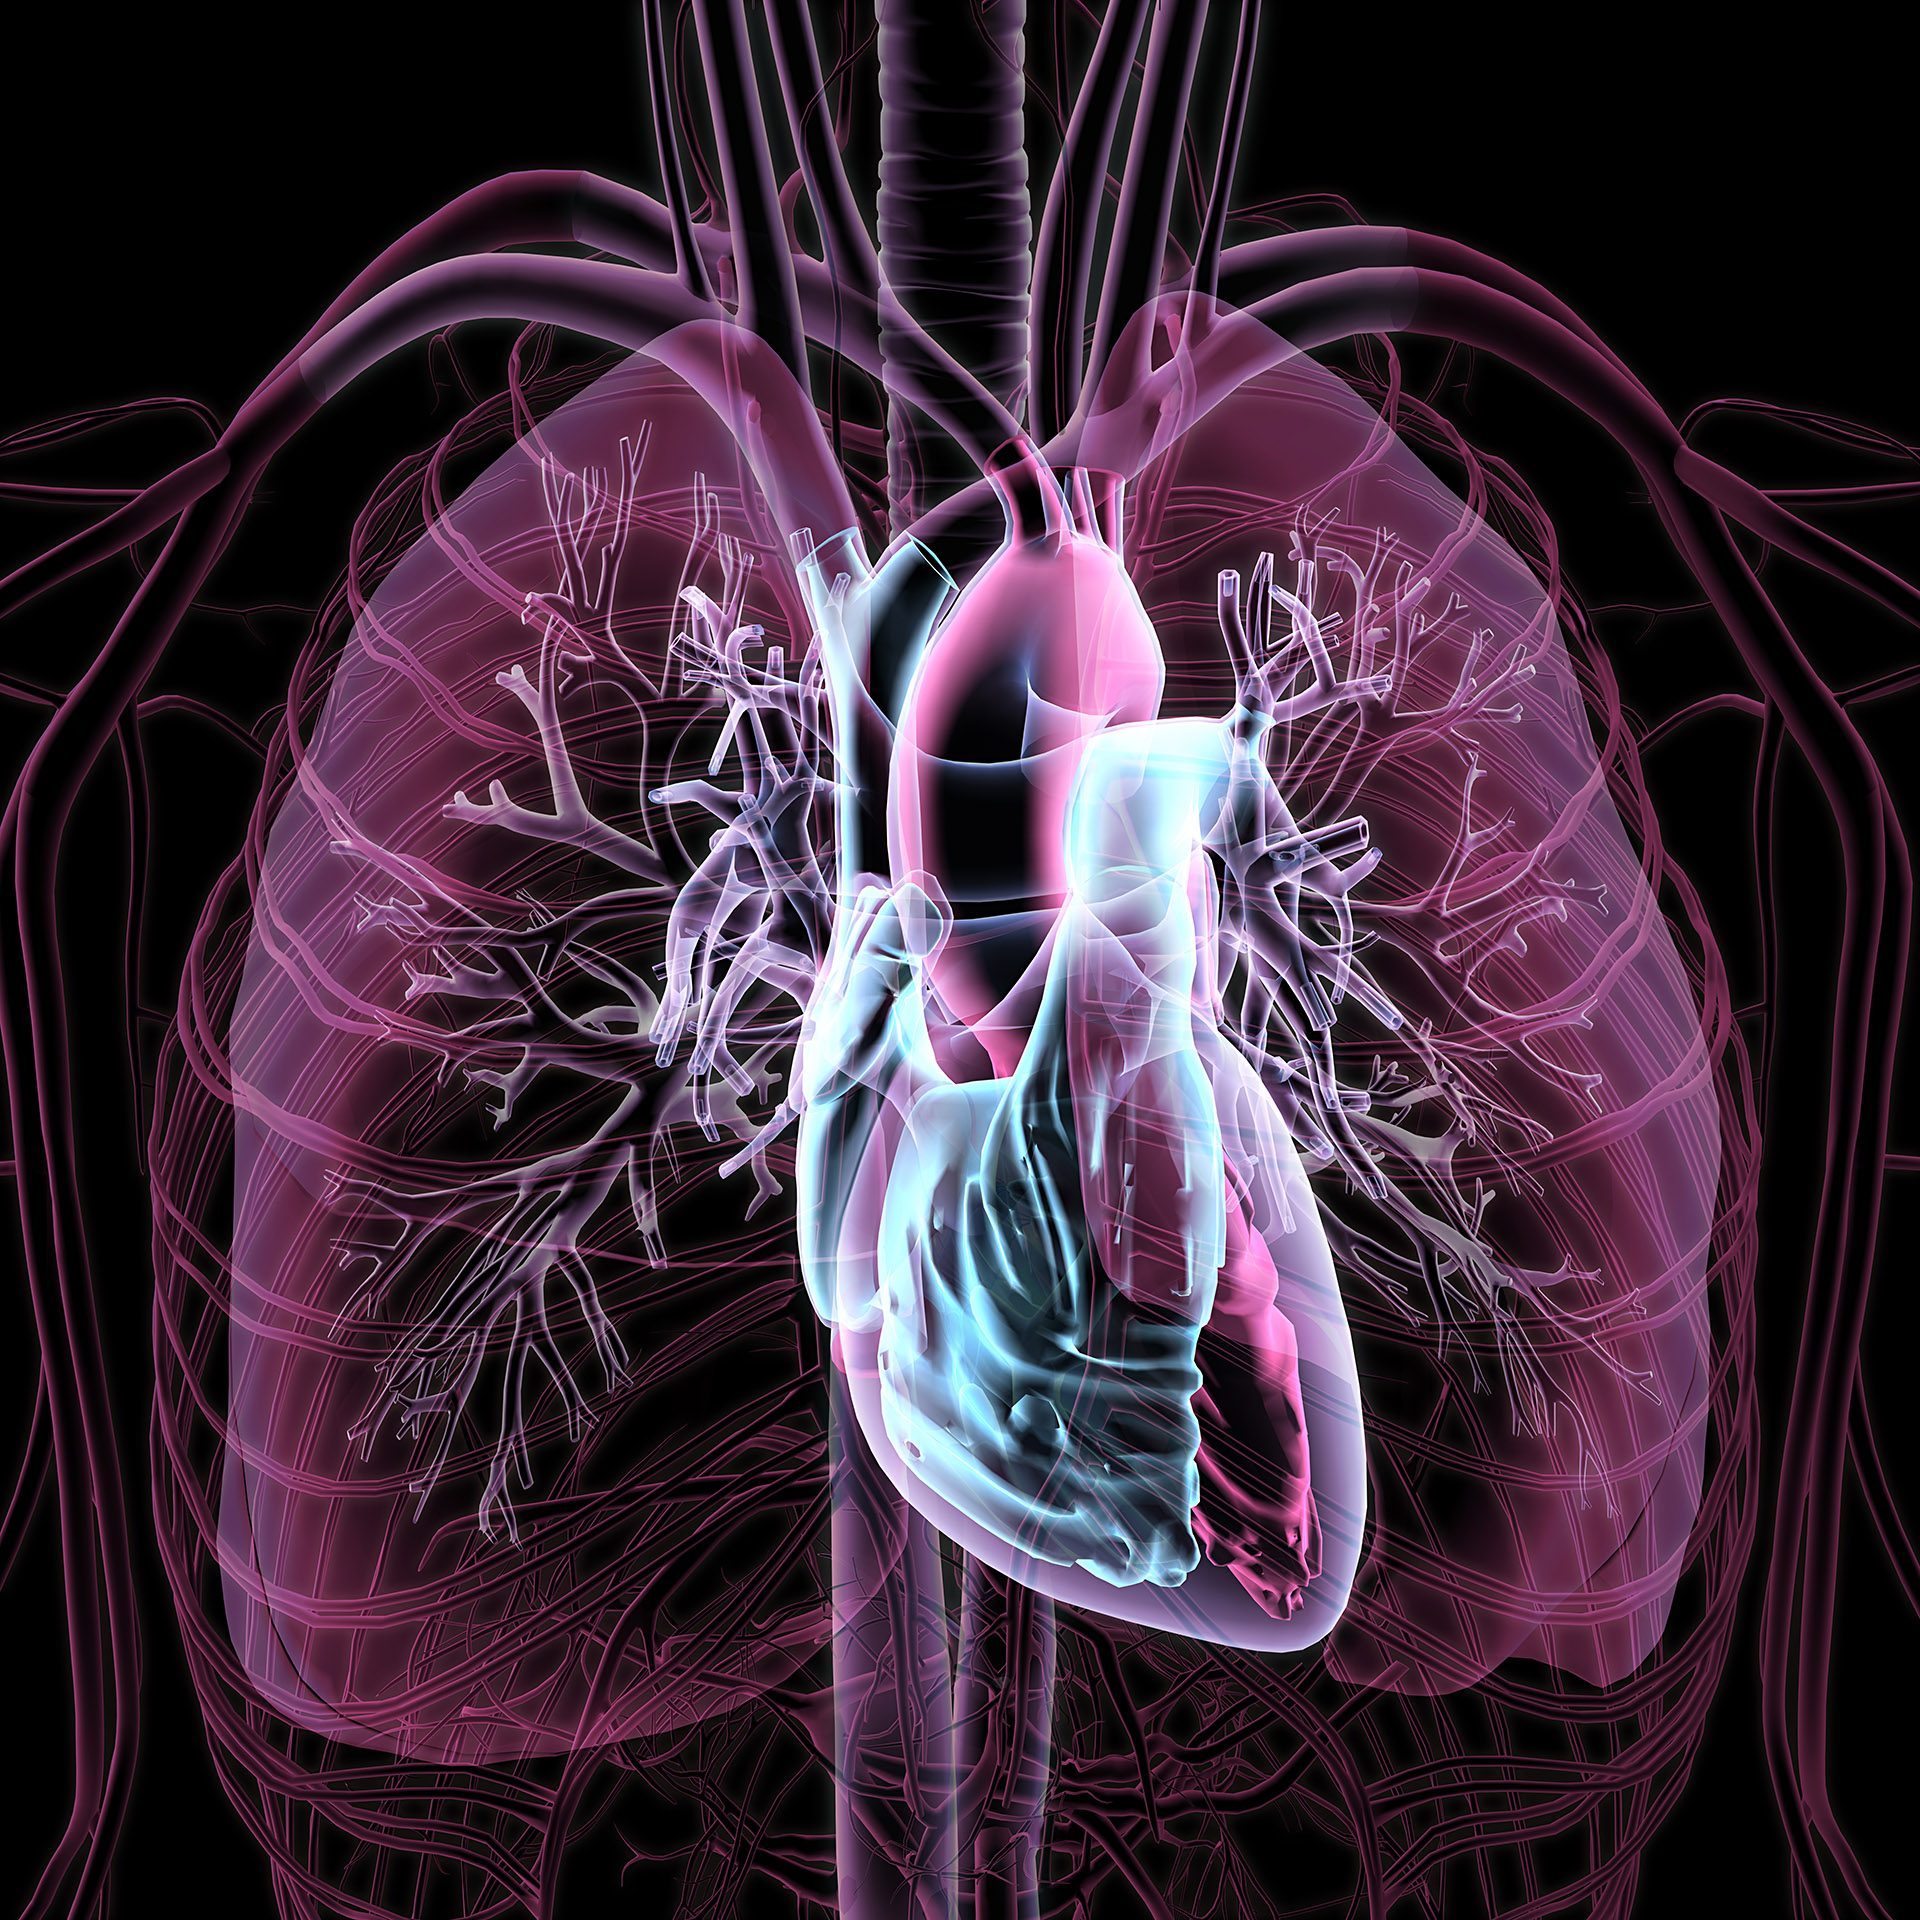 Pulmonary hypertension is a type of high blood pressure that affects the arteries in the lungs and the right side of the heart. Photo/Net